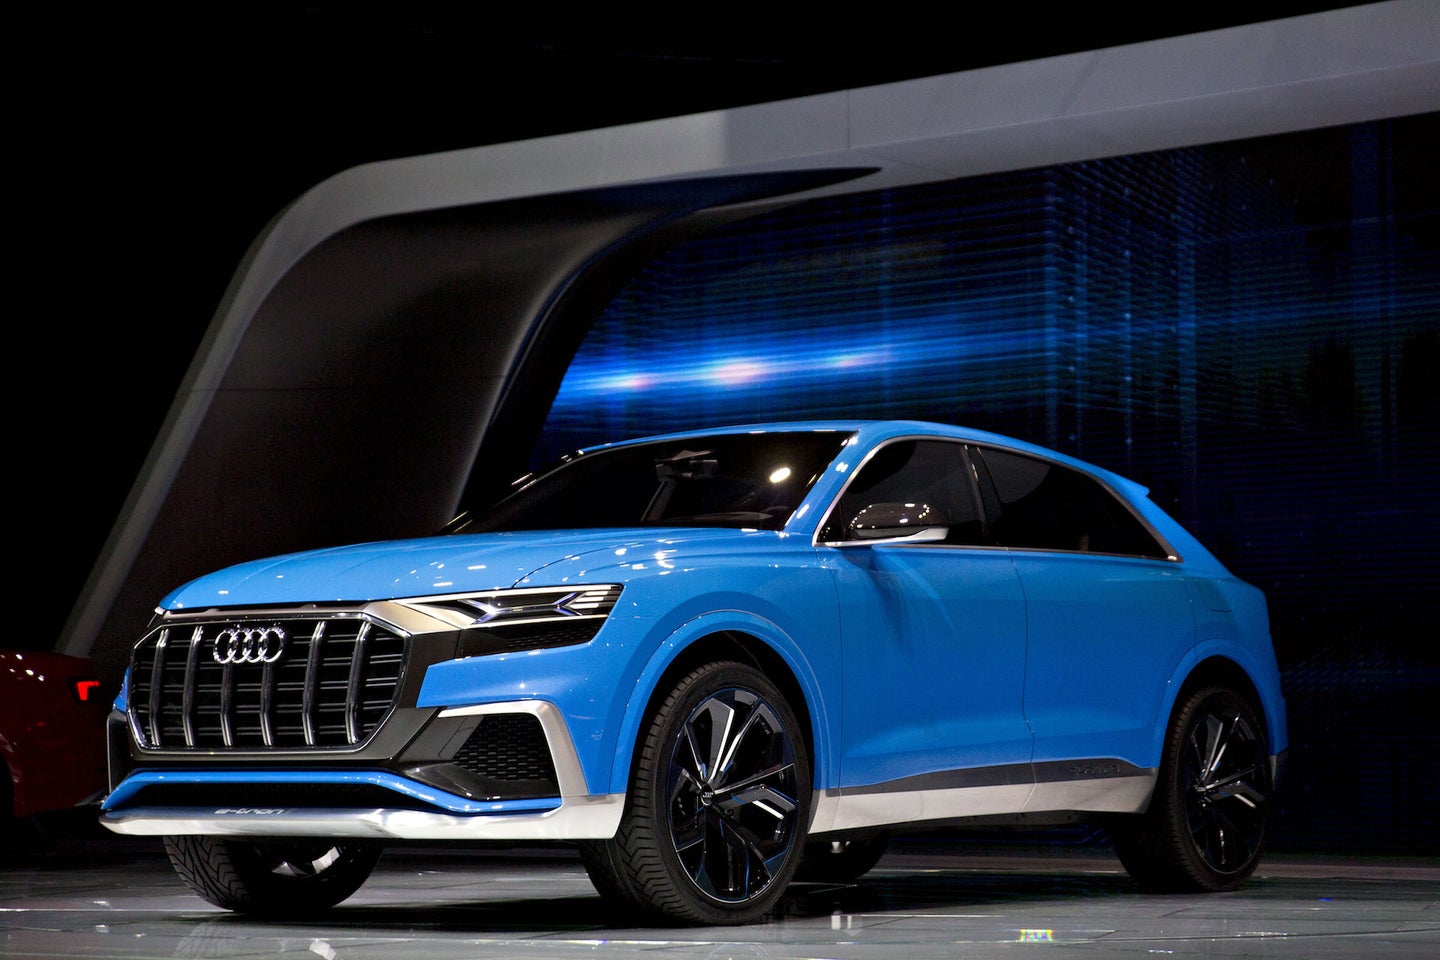 Audi RS Q8 Concept Slated For Debut at Geneva Motor Show